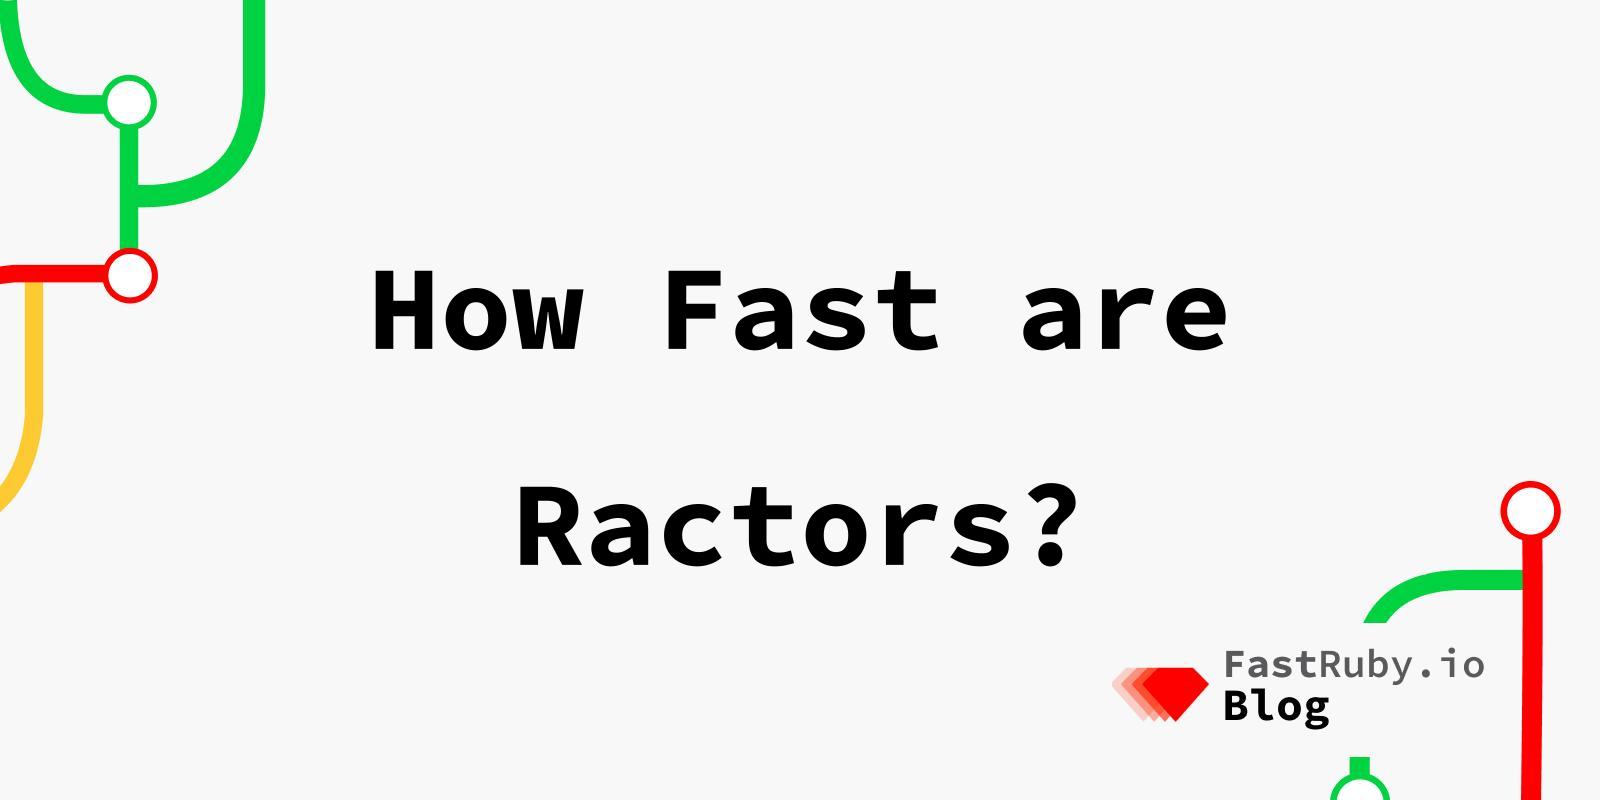 How Fast are Ractors?